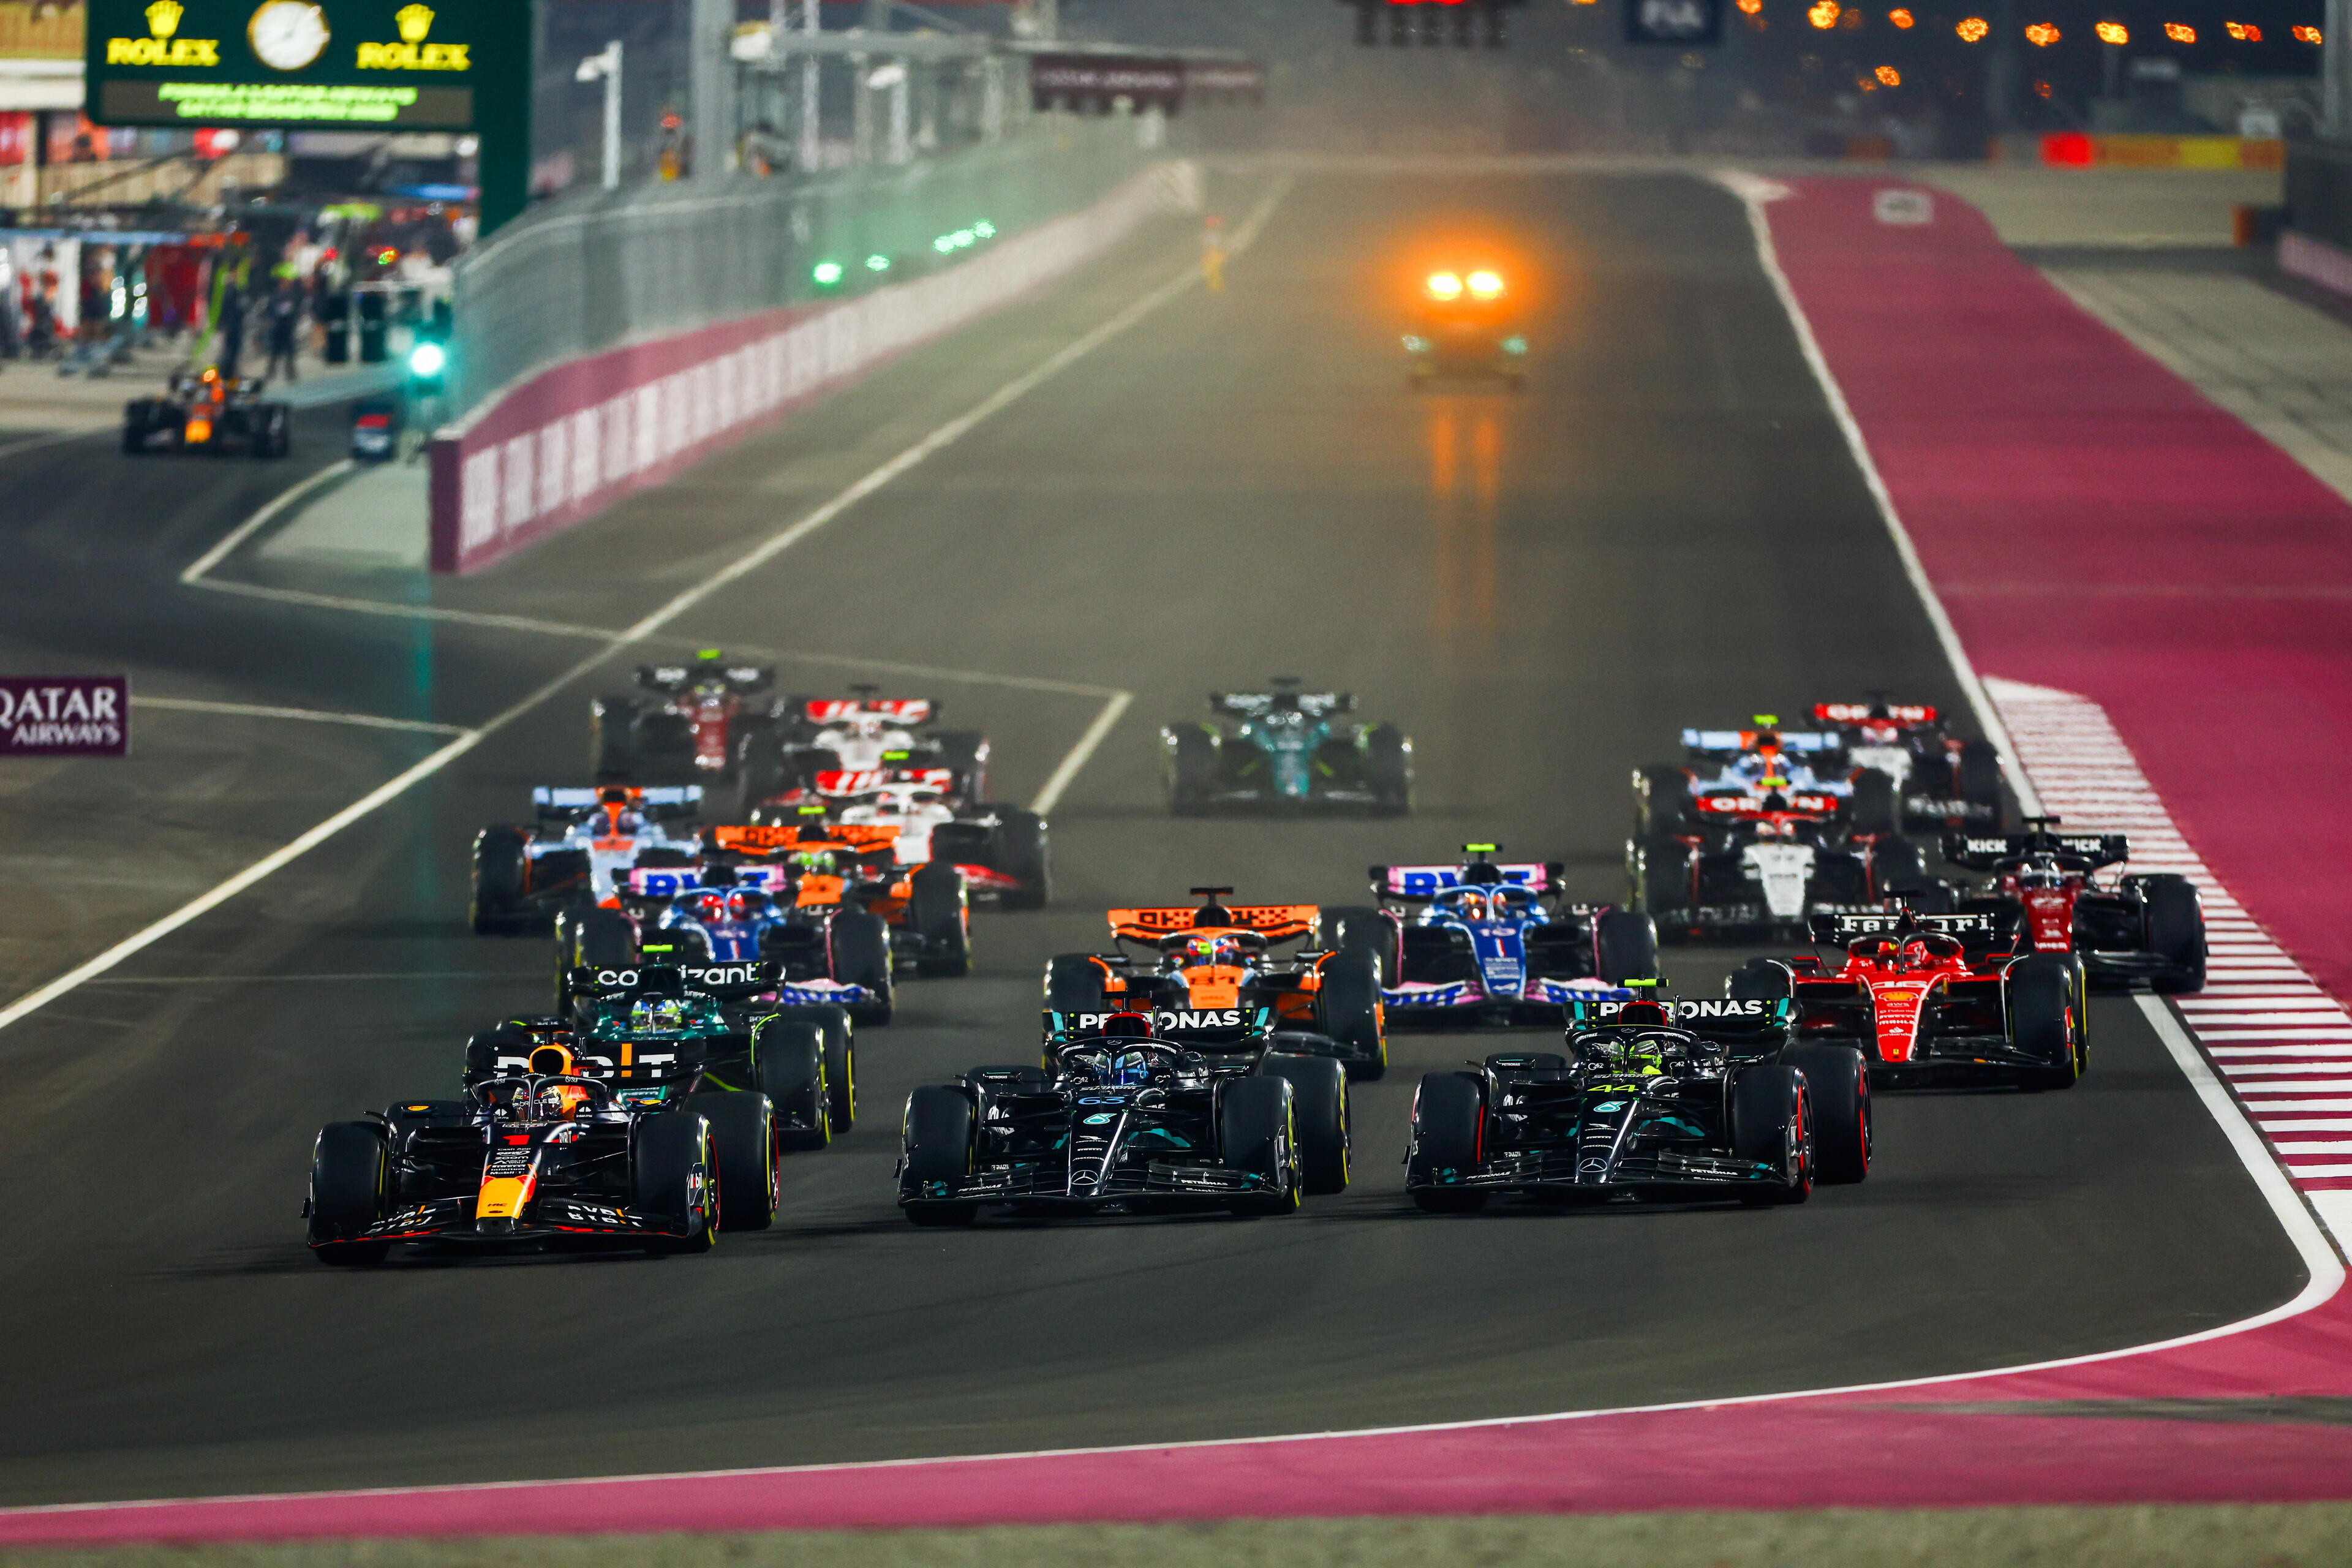 The Las Vegas Grand Prix starts at 10pm, becoming the latest F1 race start head of Qatar (pictured) and Saudi Arabia.